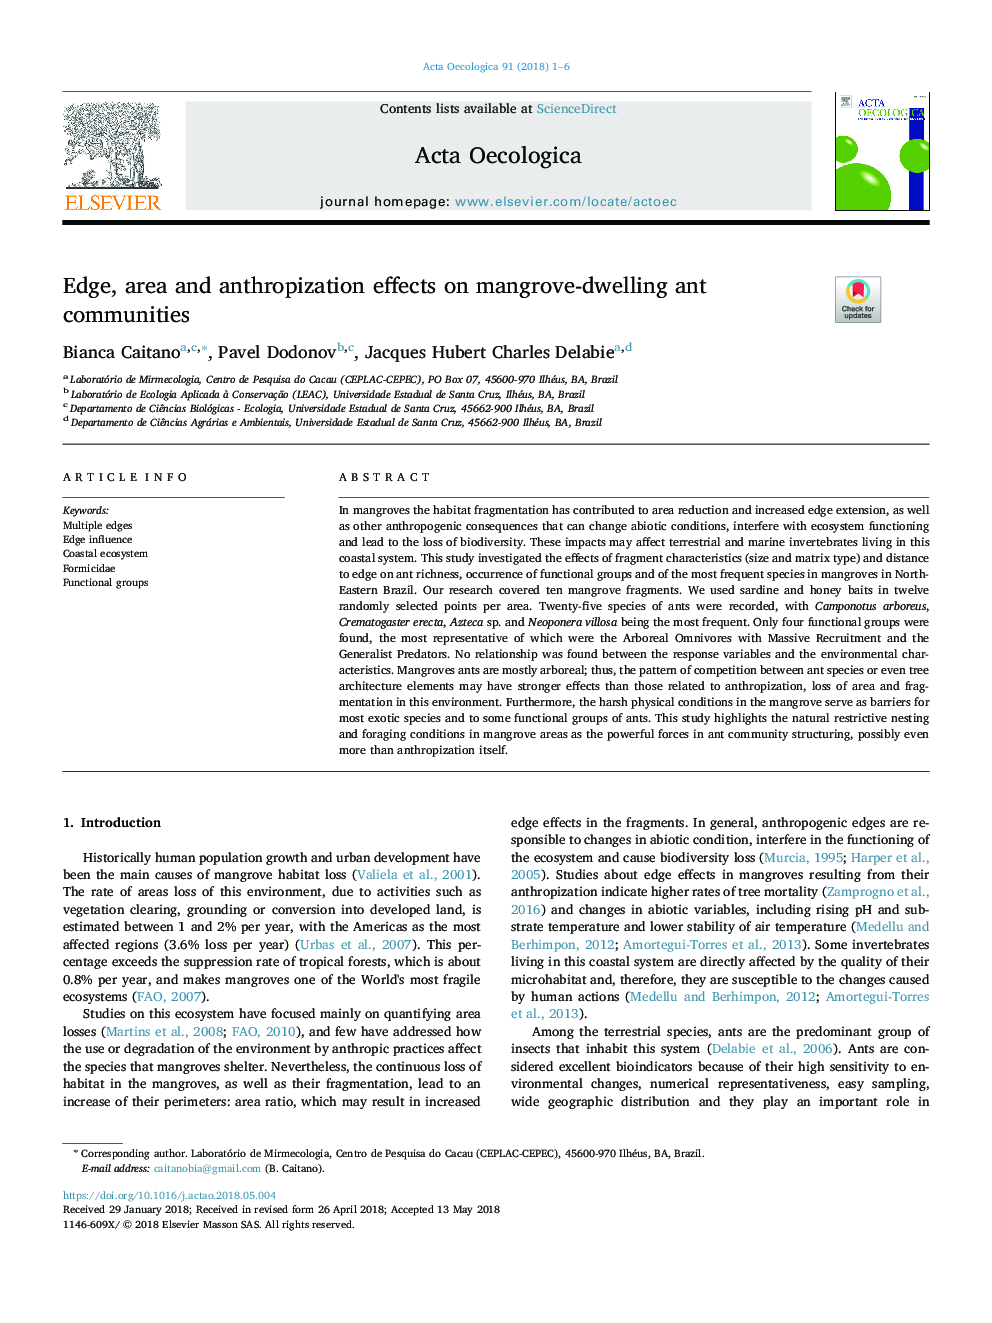 Edge, area and anthropization effects on mangrove-dwelling ant communities